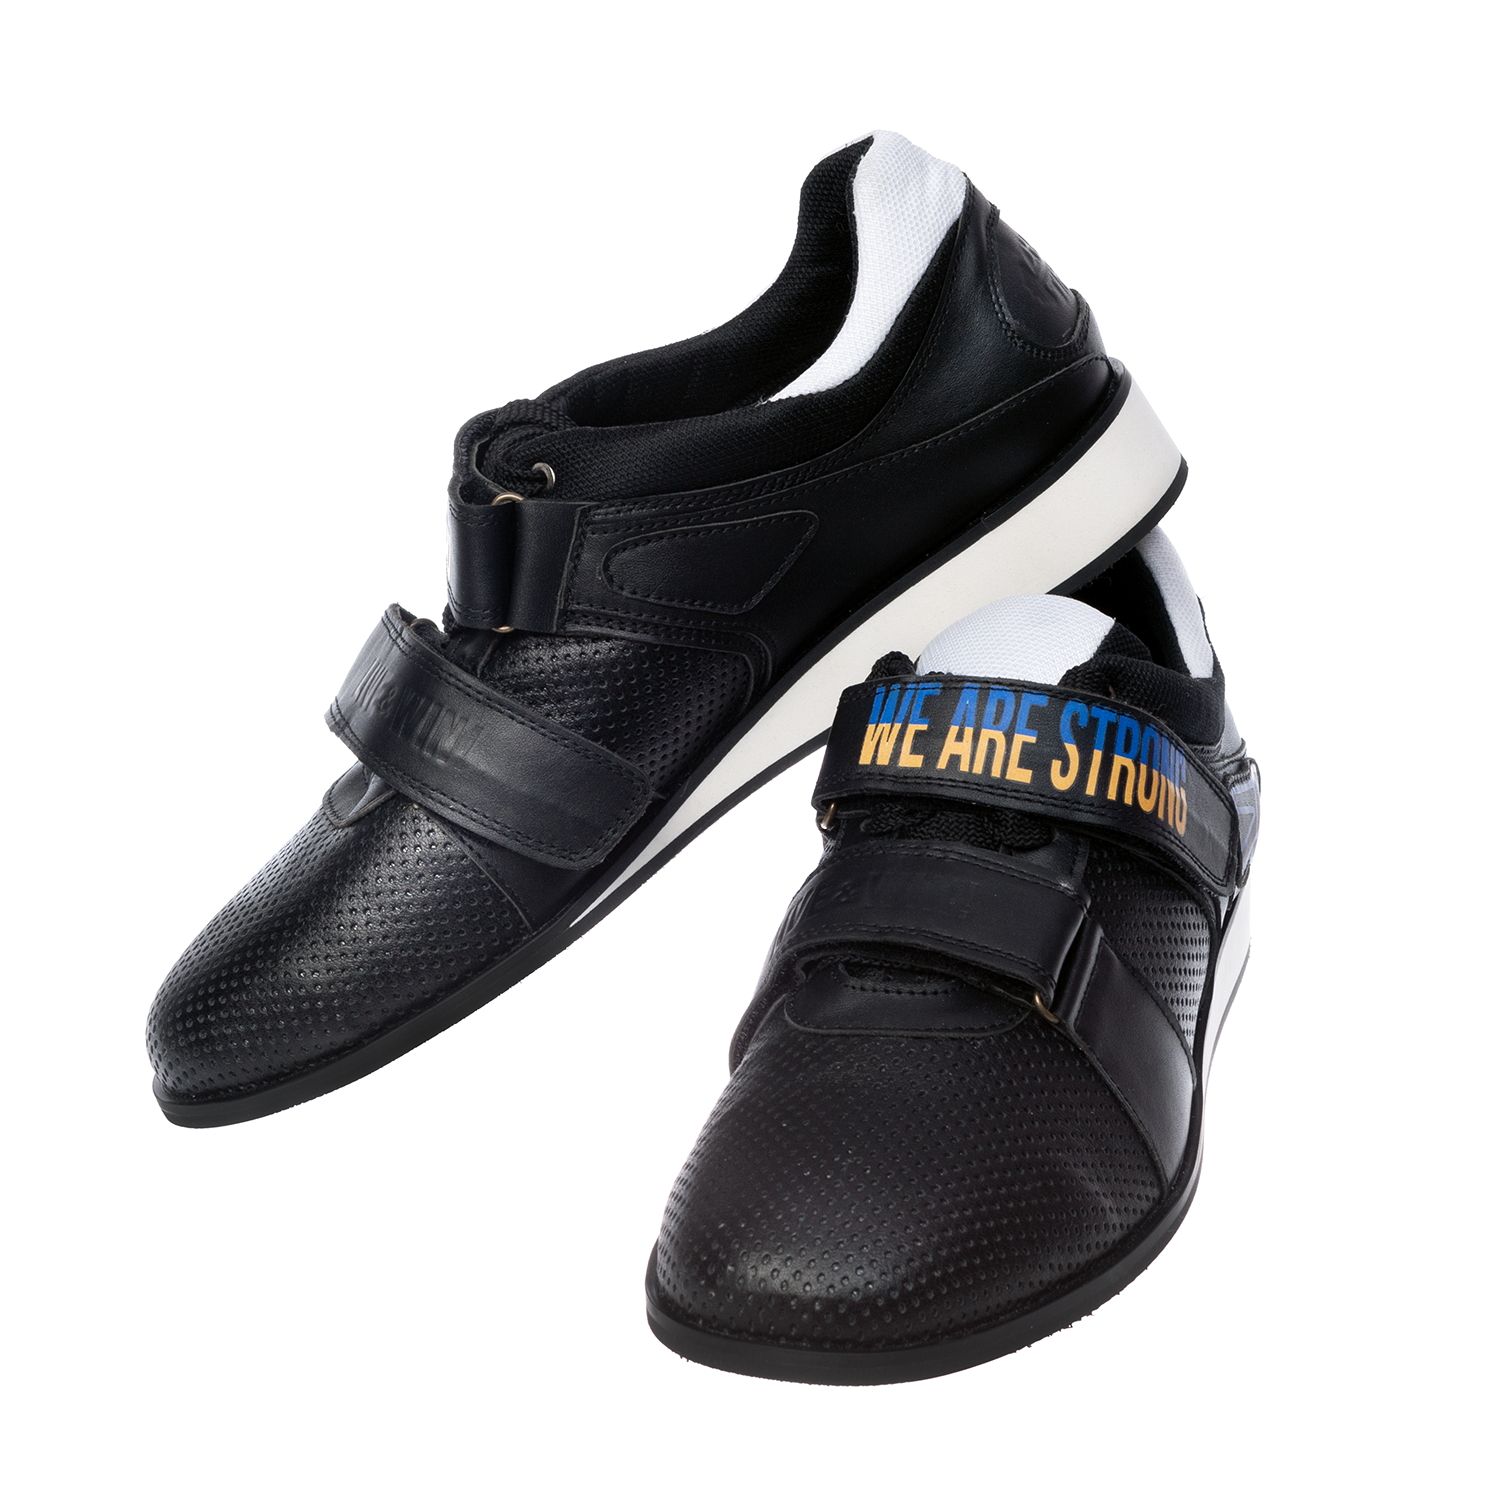 Weightlifting shoes We are strong, black, size 49 (UKR)